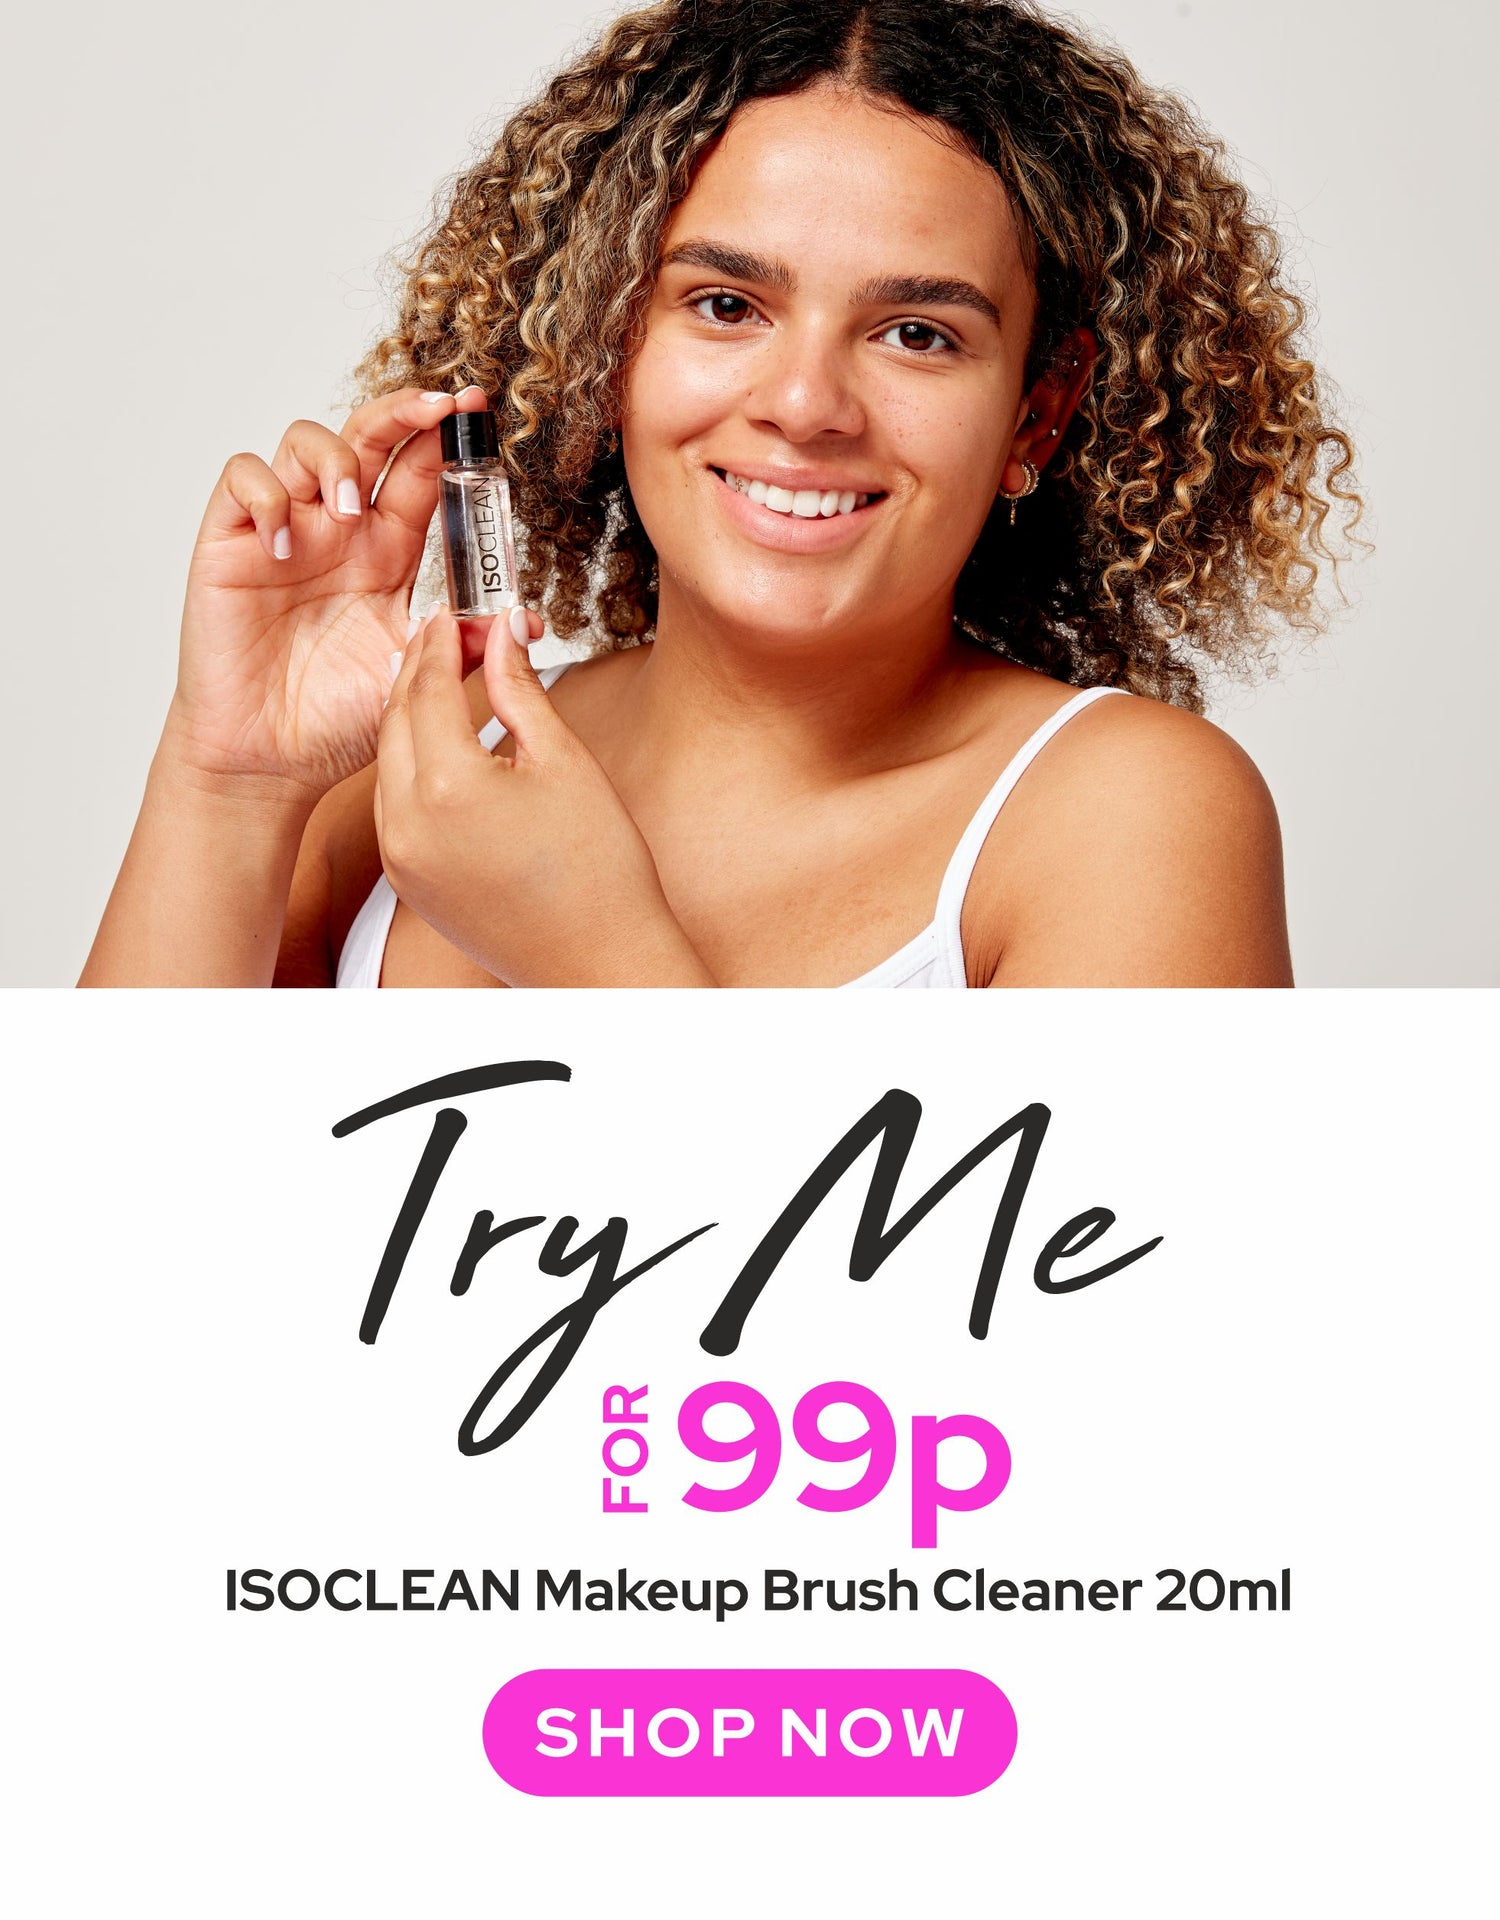 Try our makeup brush cleaner for £0.99p, with free UK delivery